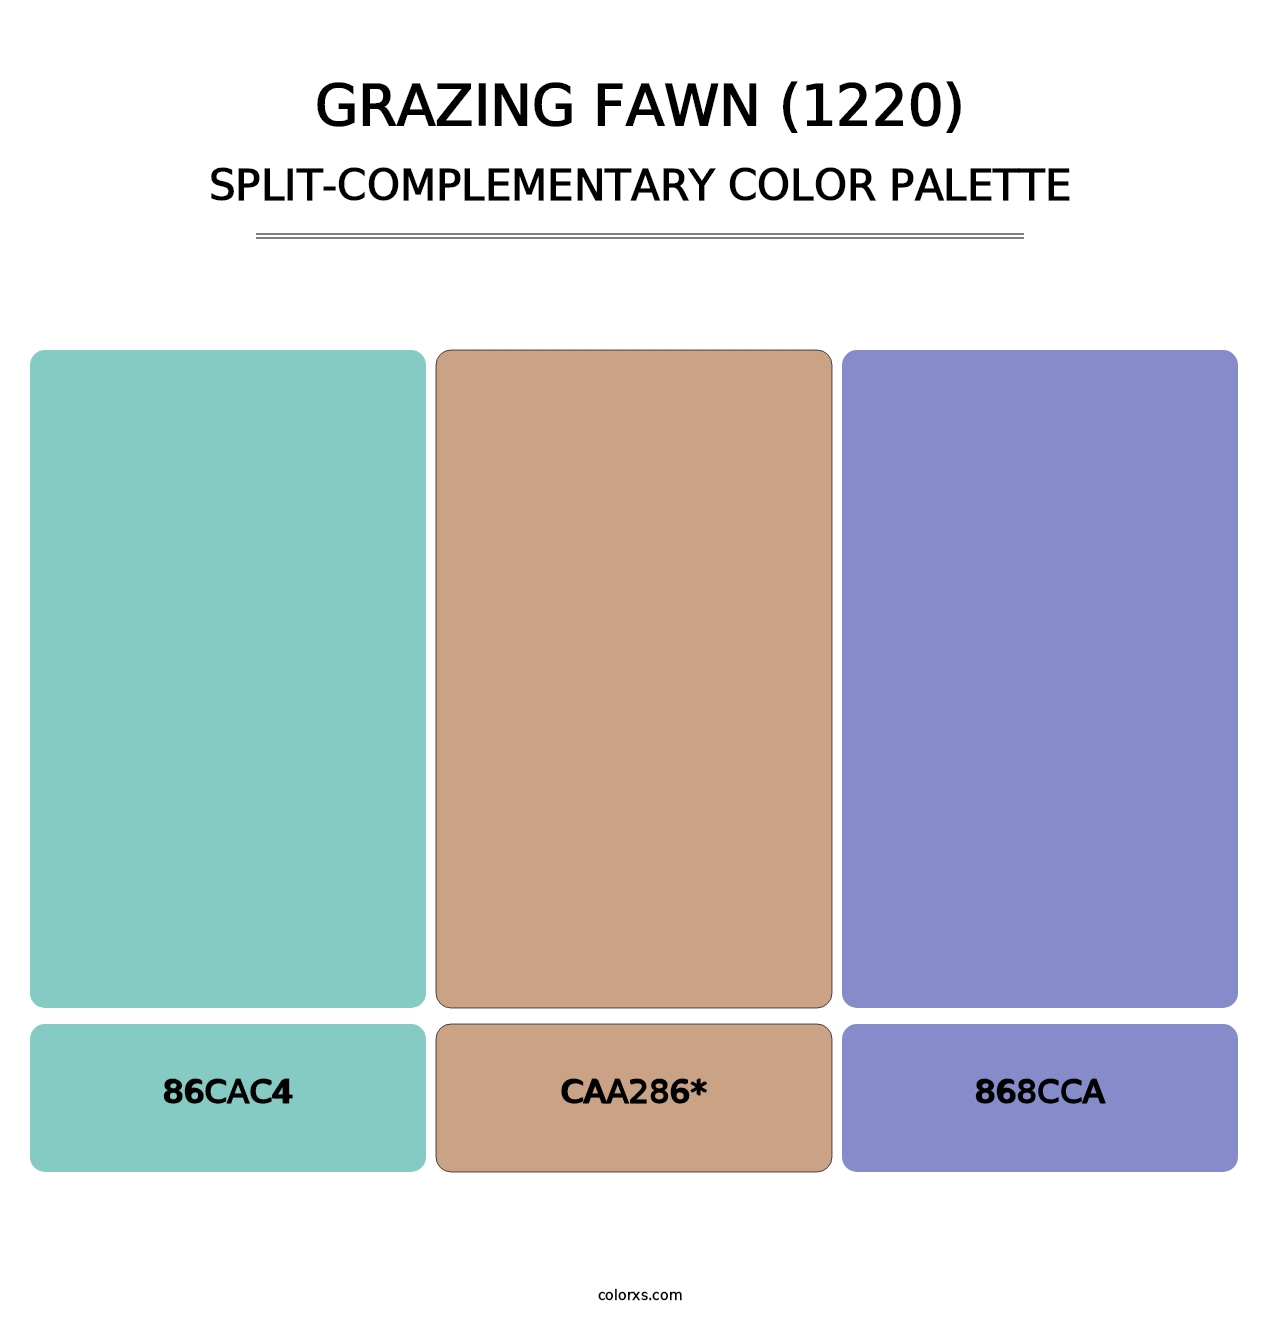 Grazing Fawn (1220) - Split-Complementary Color Palette